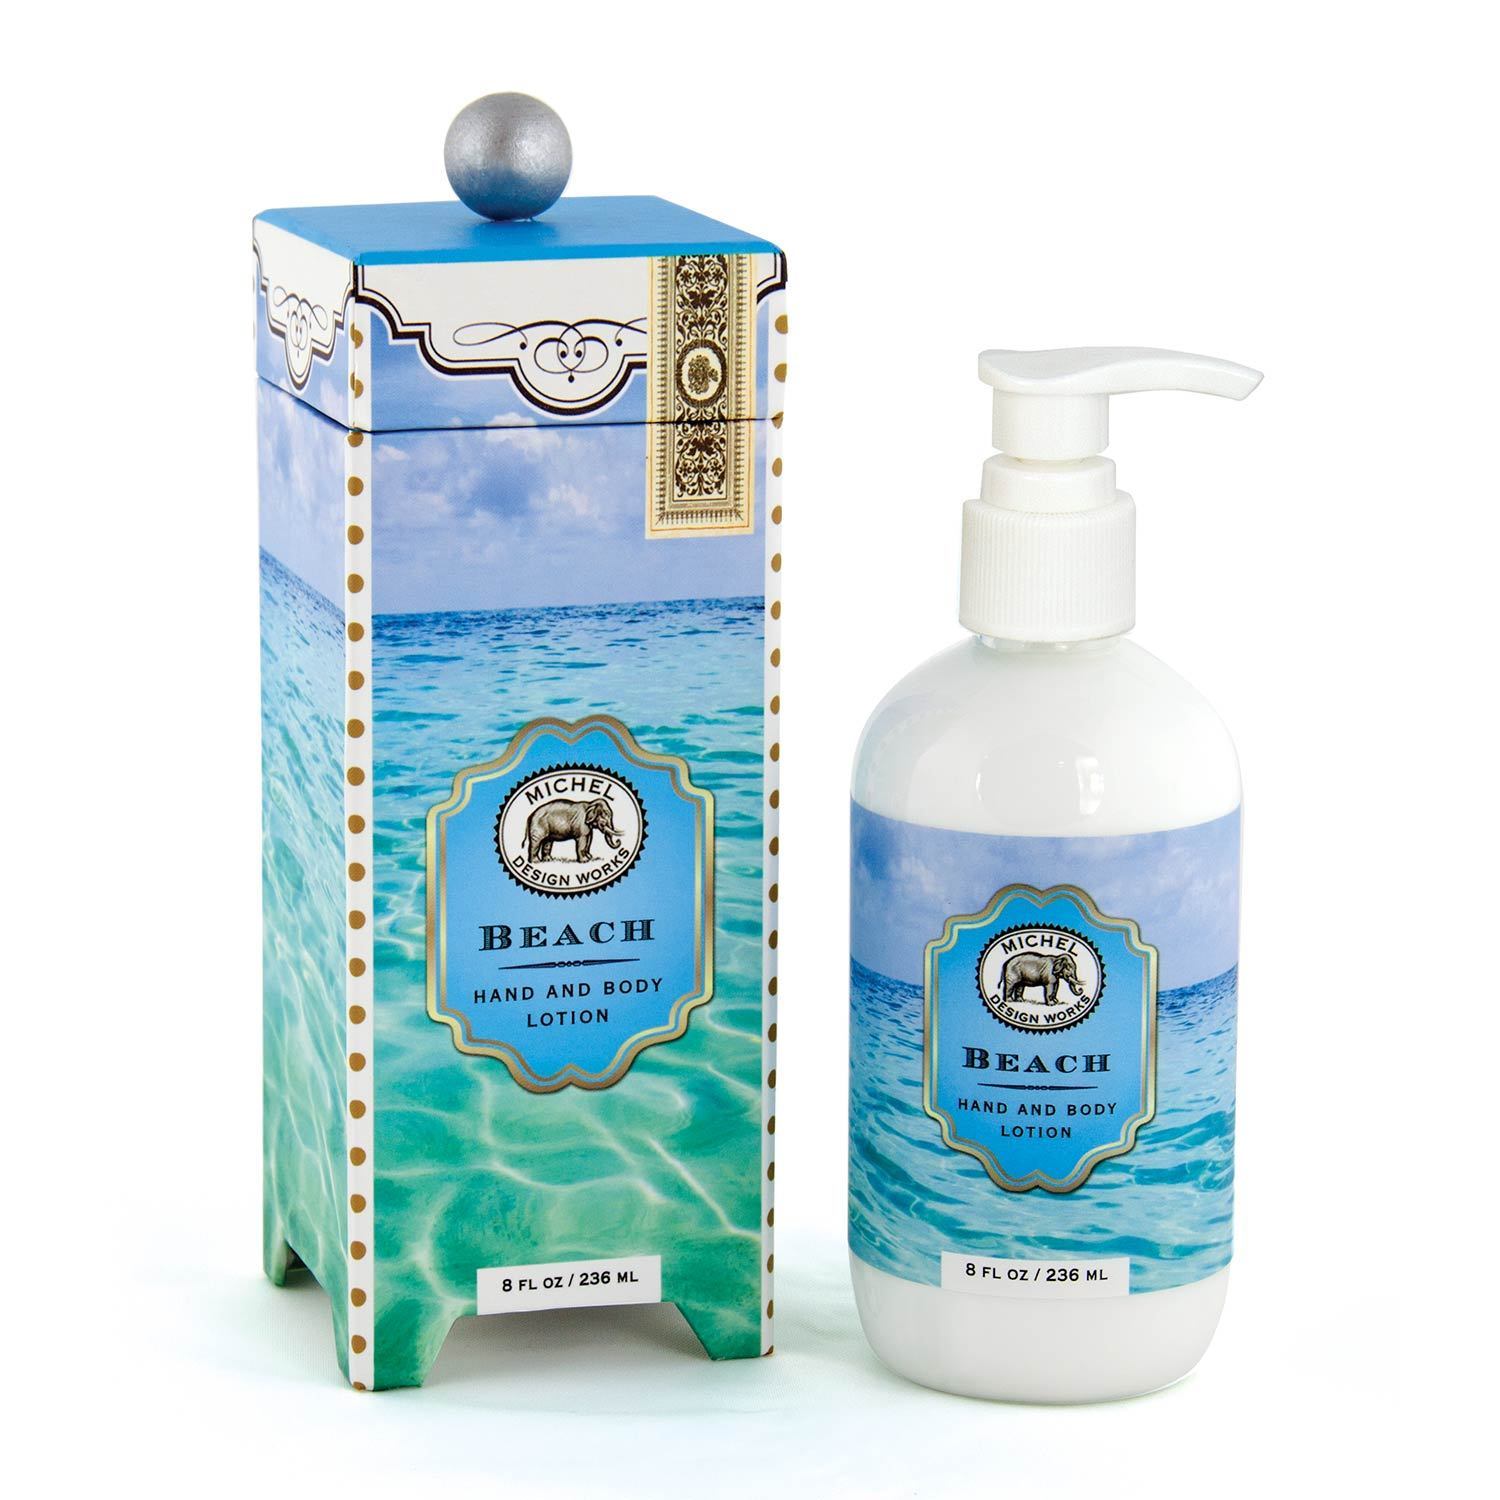 Beach - Hand and Body Lotion    